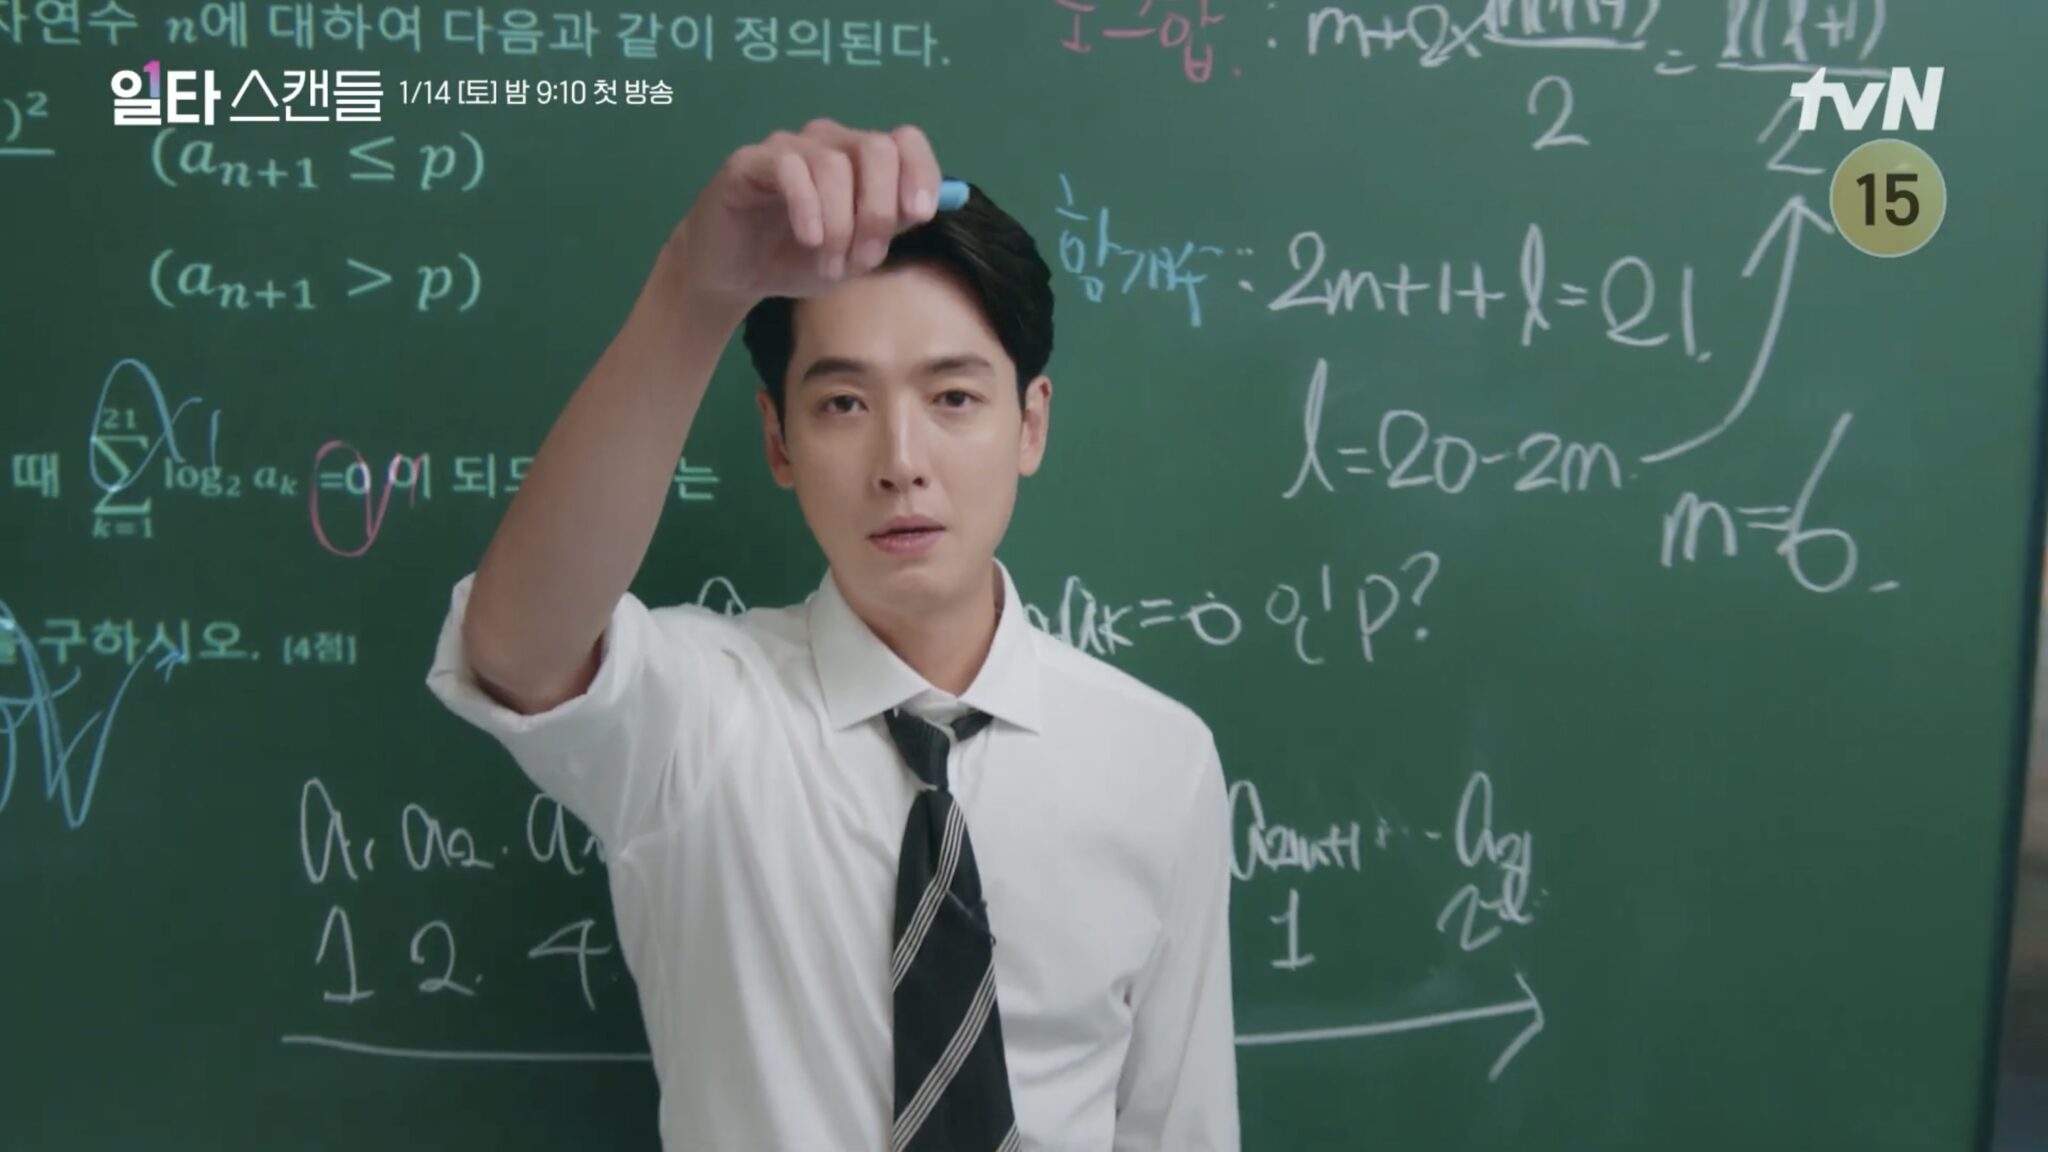 Jung Kyung-ho gives a Crash Course in Romance